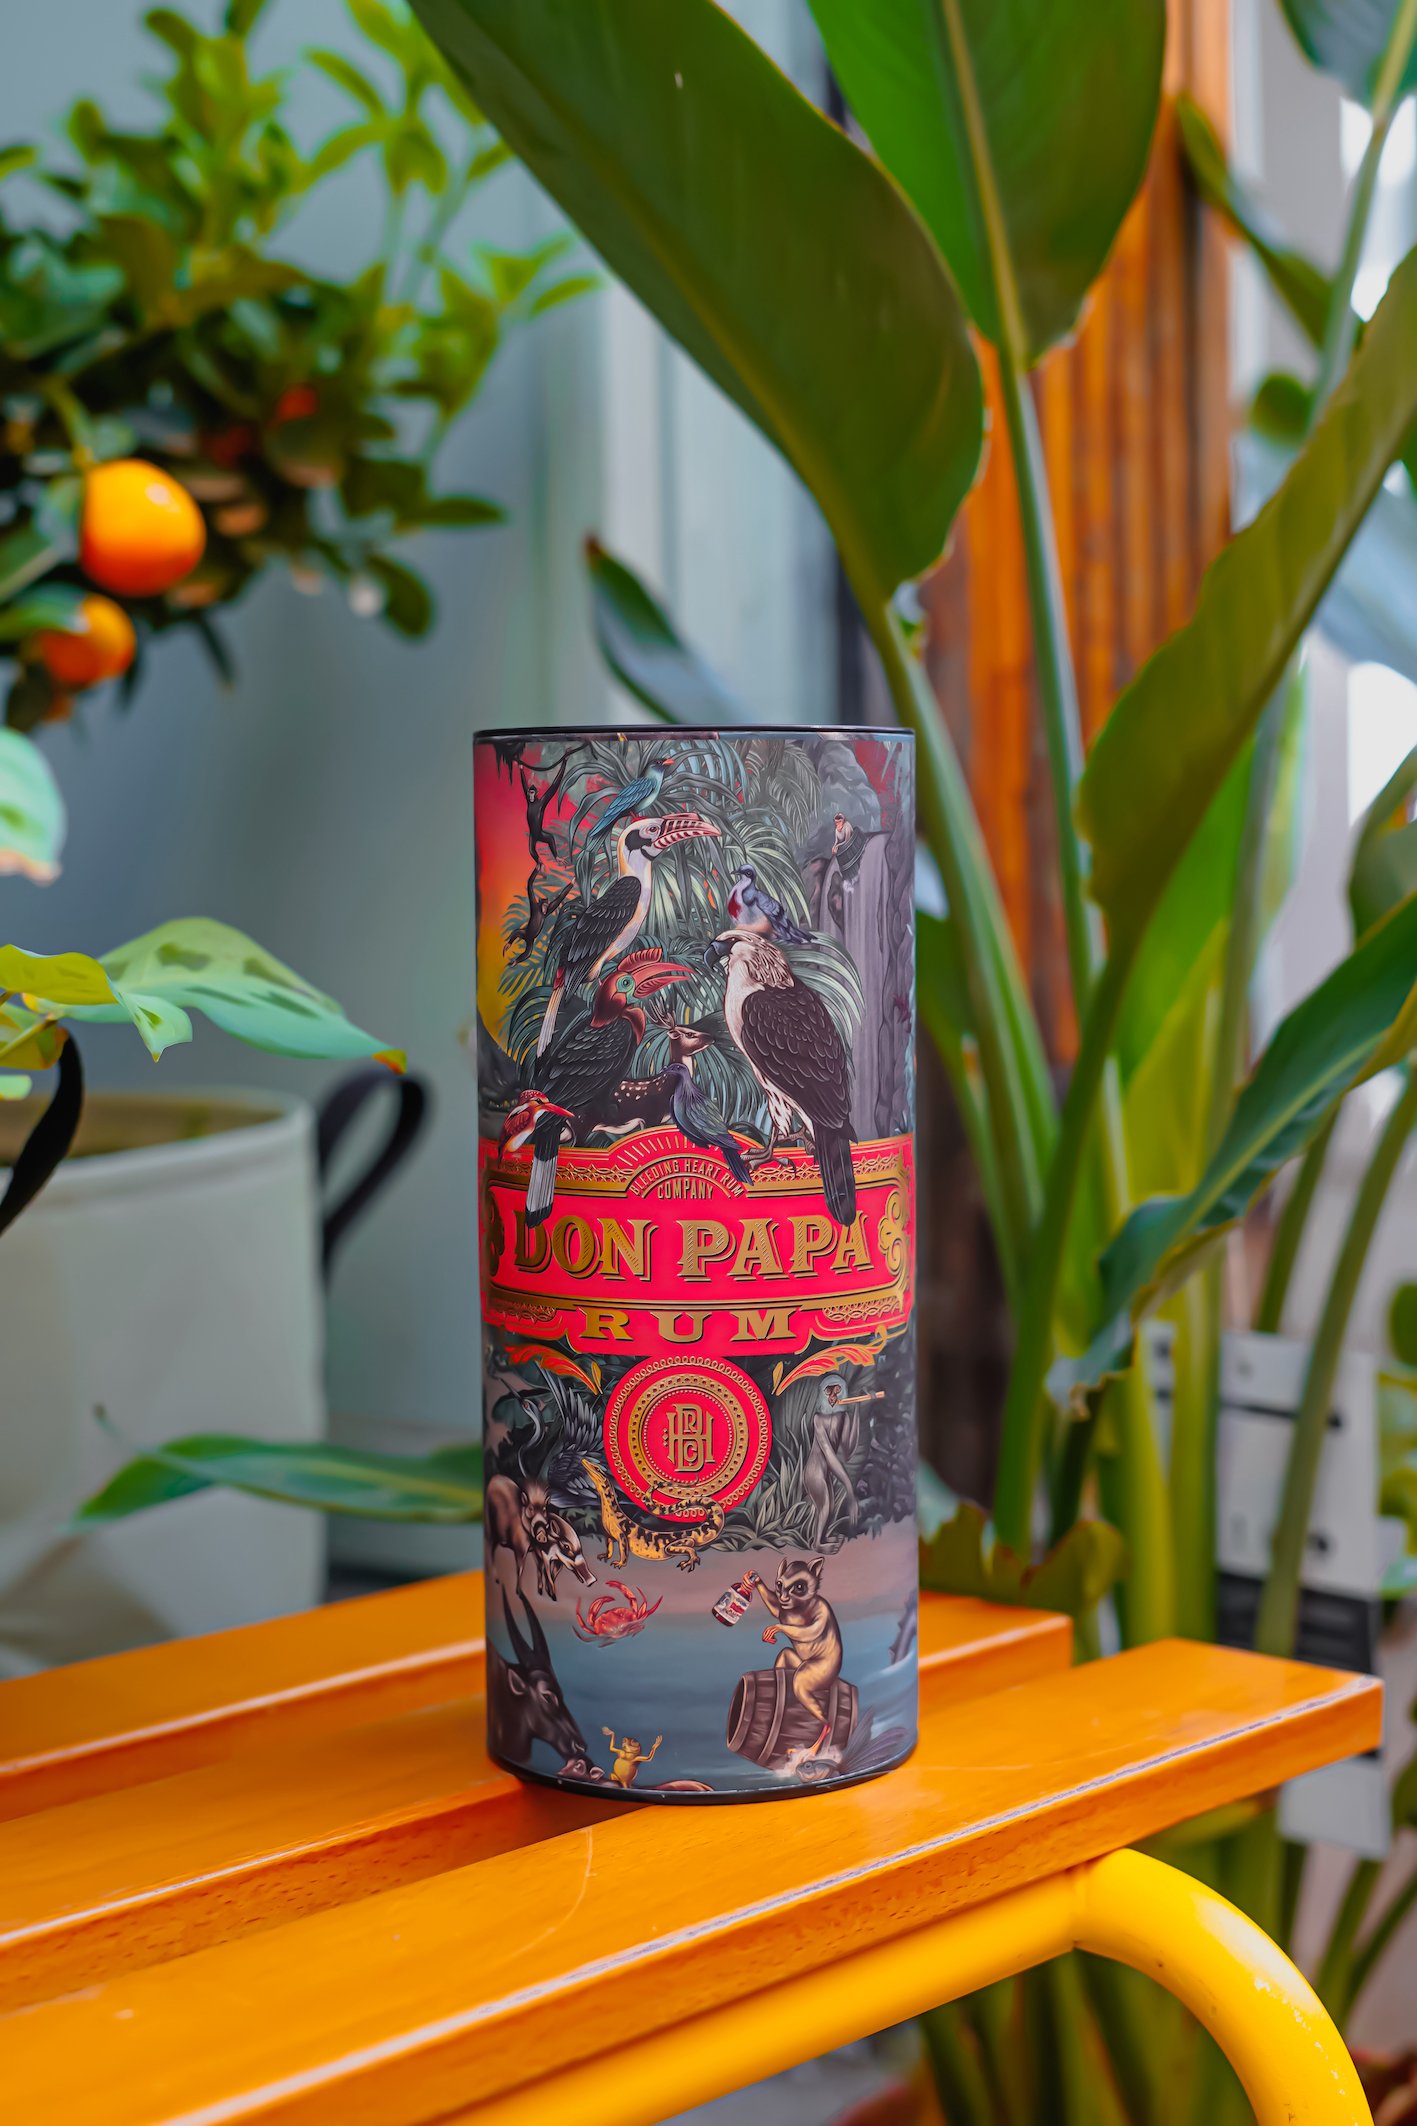 The limited edition ‘Secrets of Sugarlandia’ gift canister aims to raise awareness and support for key conservation efforts in Negros Occidental, known locally as Sugarlandia, the island home of Don Papa.jpeg